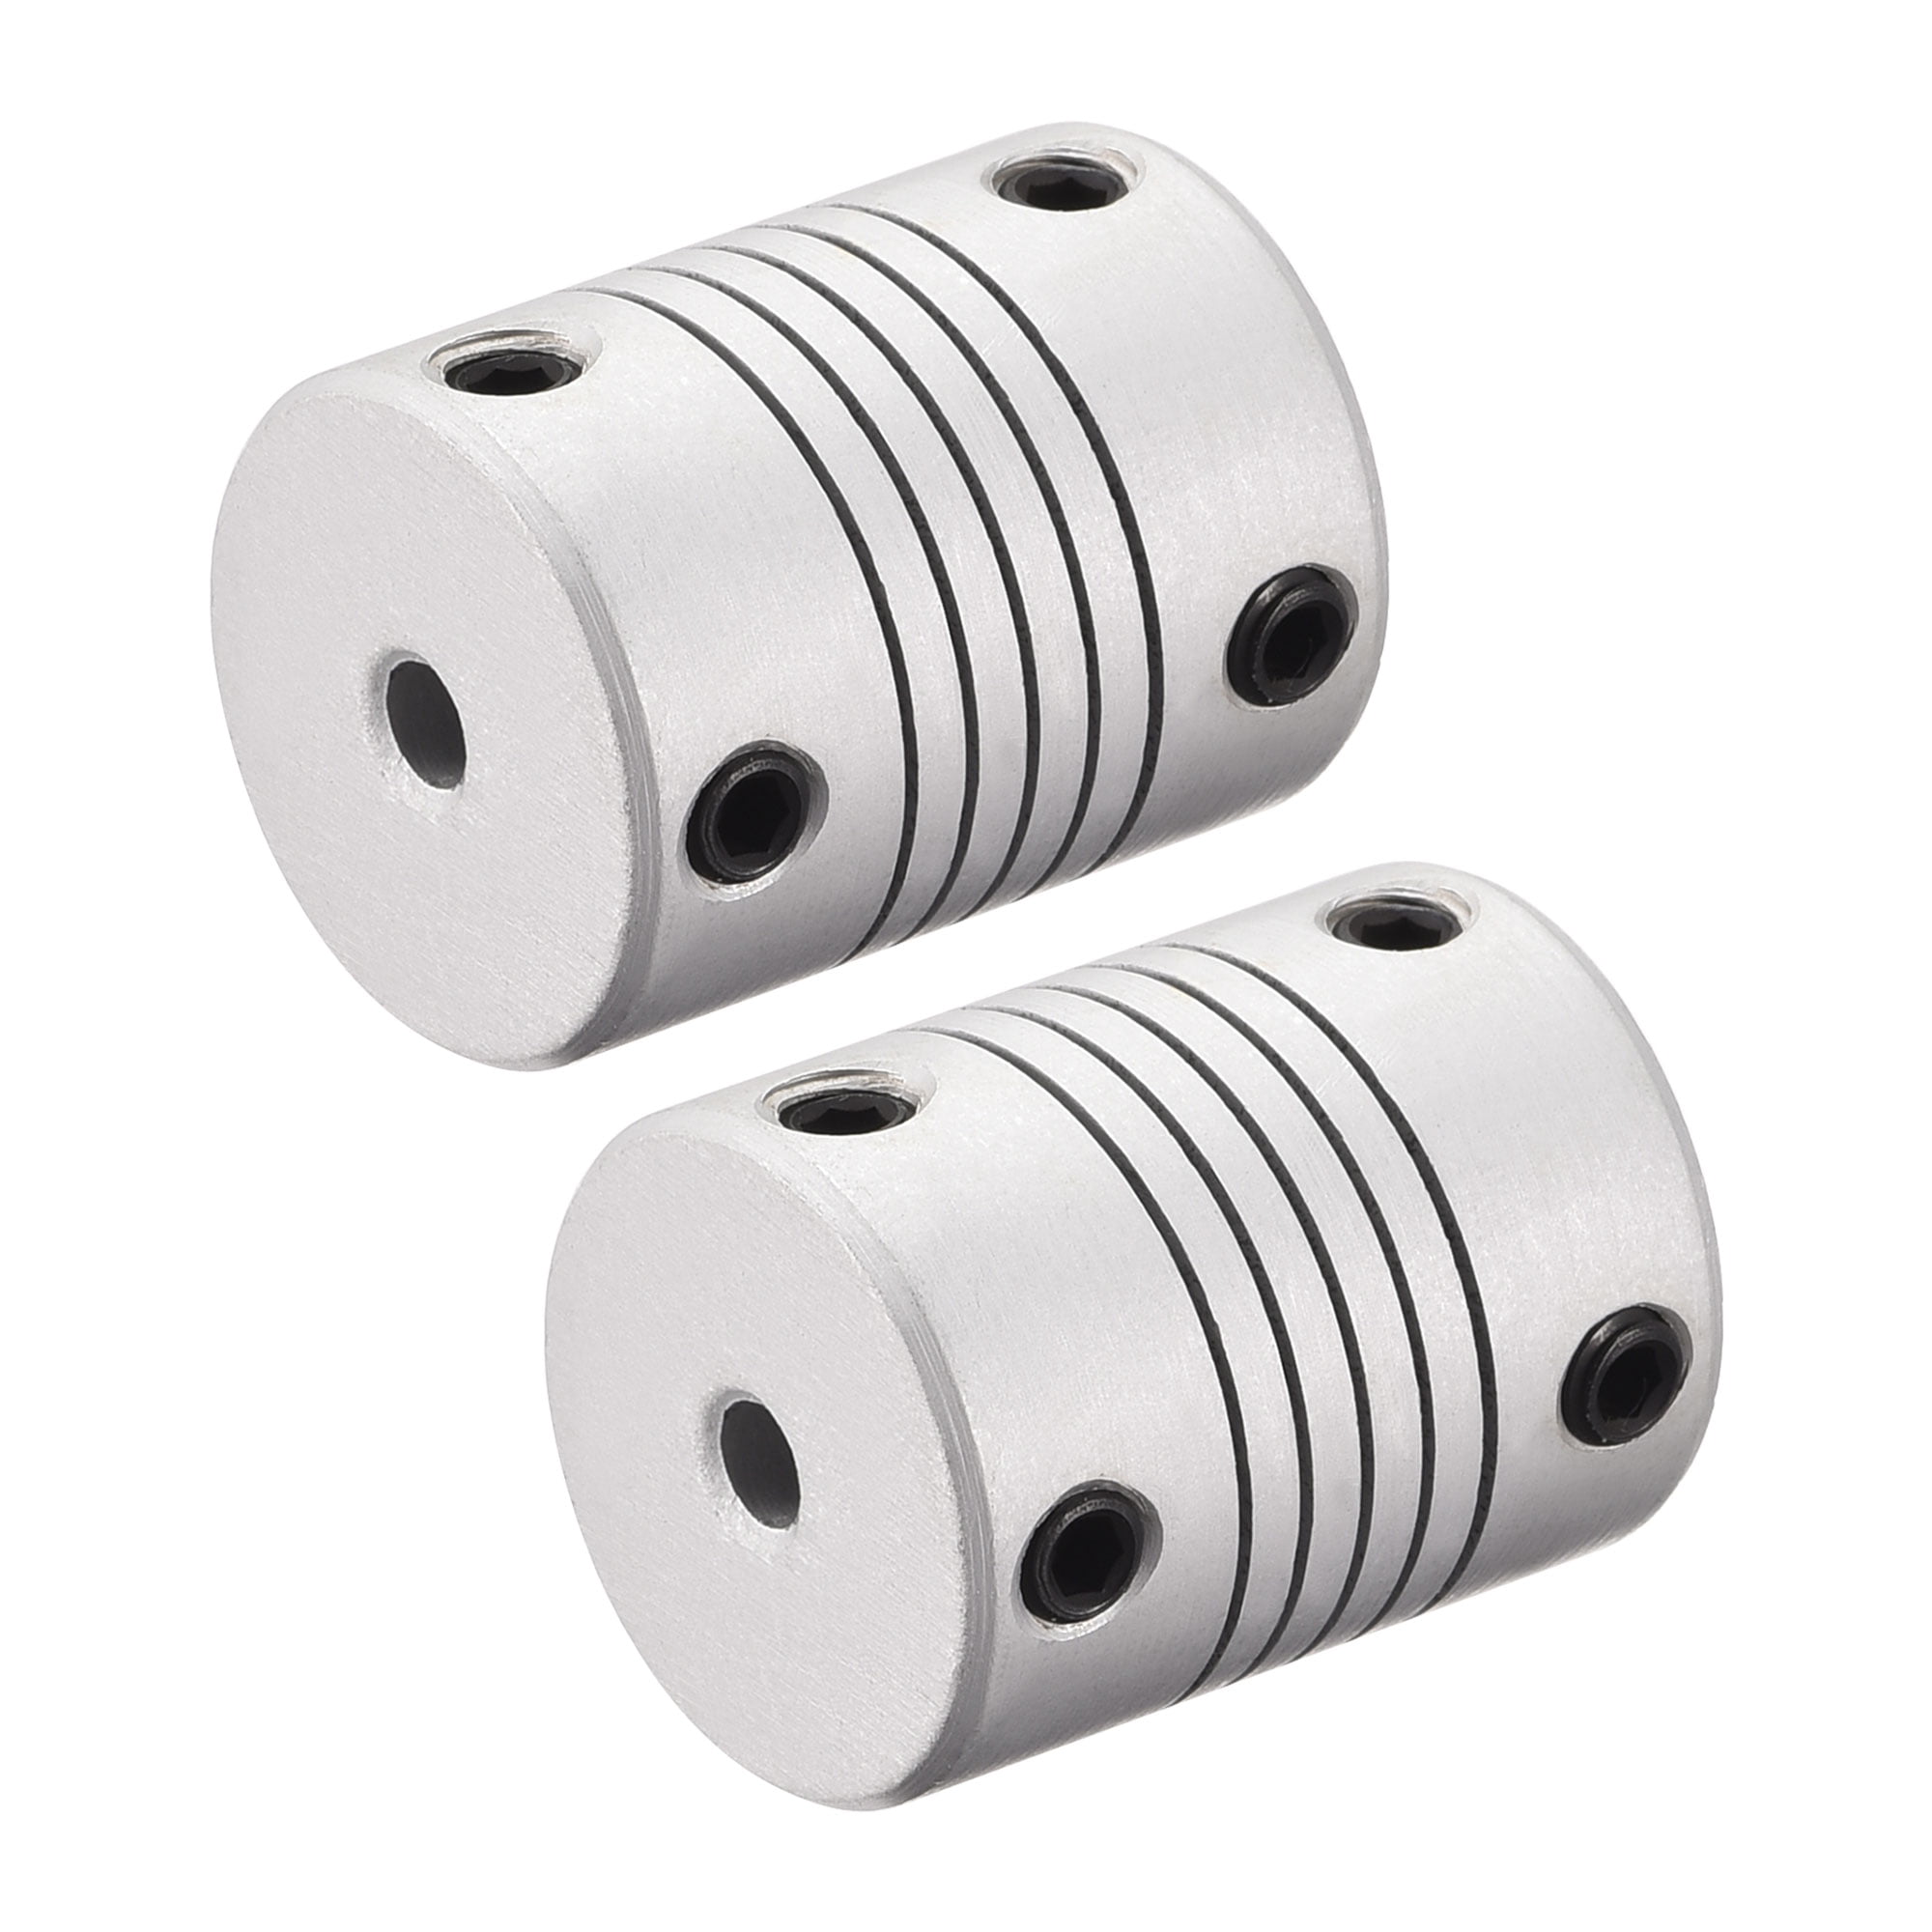 uxcell 4mm to 6.35mm Aluminum Alloy Shaft Coupling Flexible Coupler Motor Connector Joint L25xD19 Silver,2pcs 